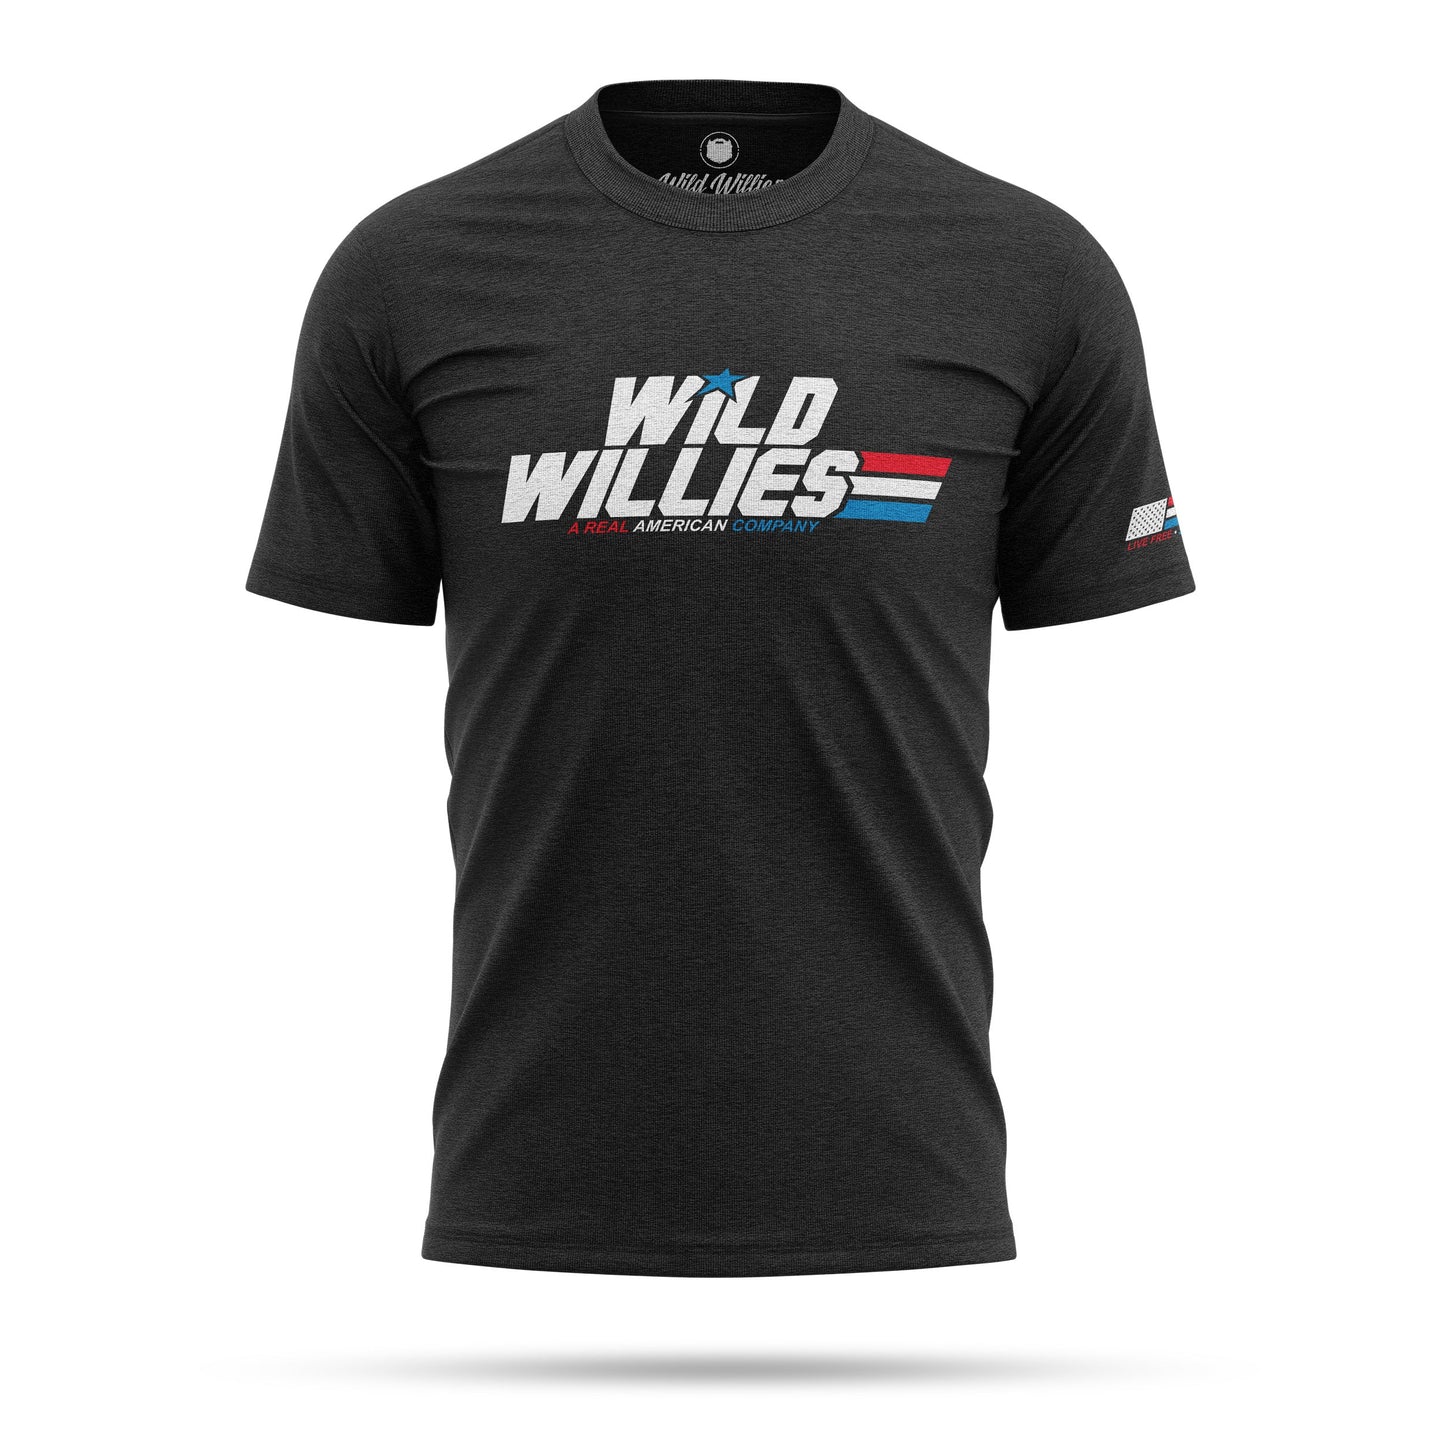 A Real American Company - T-Shirt T-Shirt Wild-Willies S Charcoal 